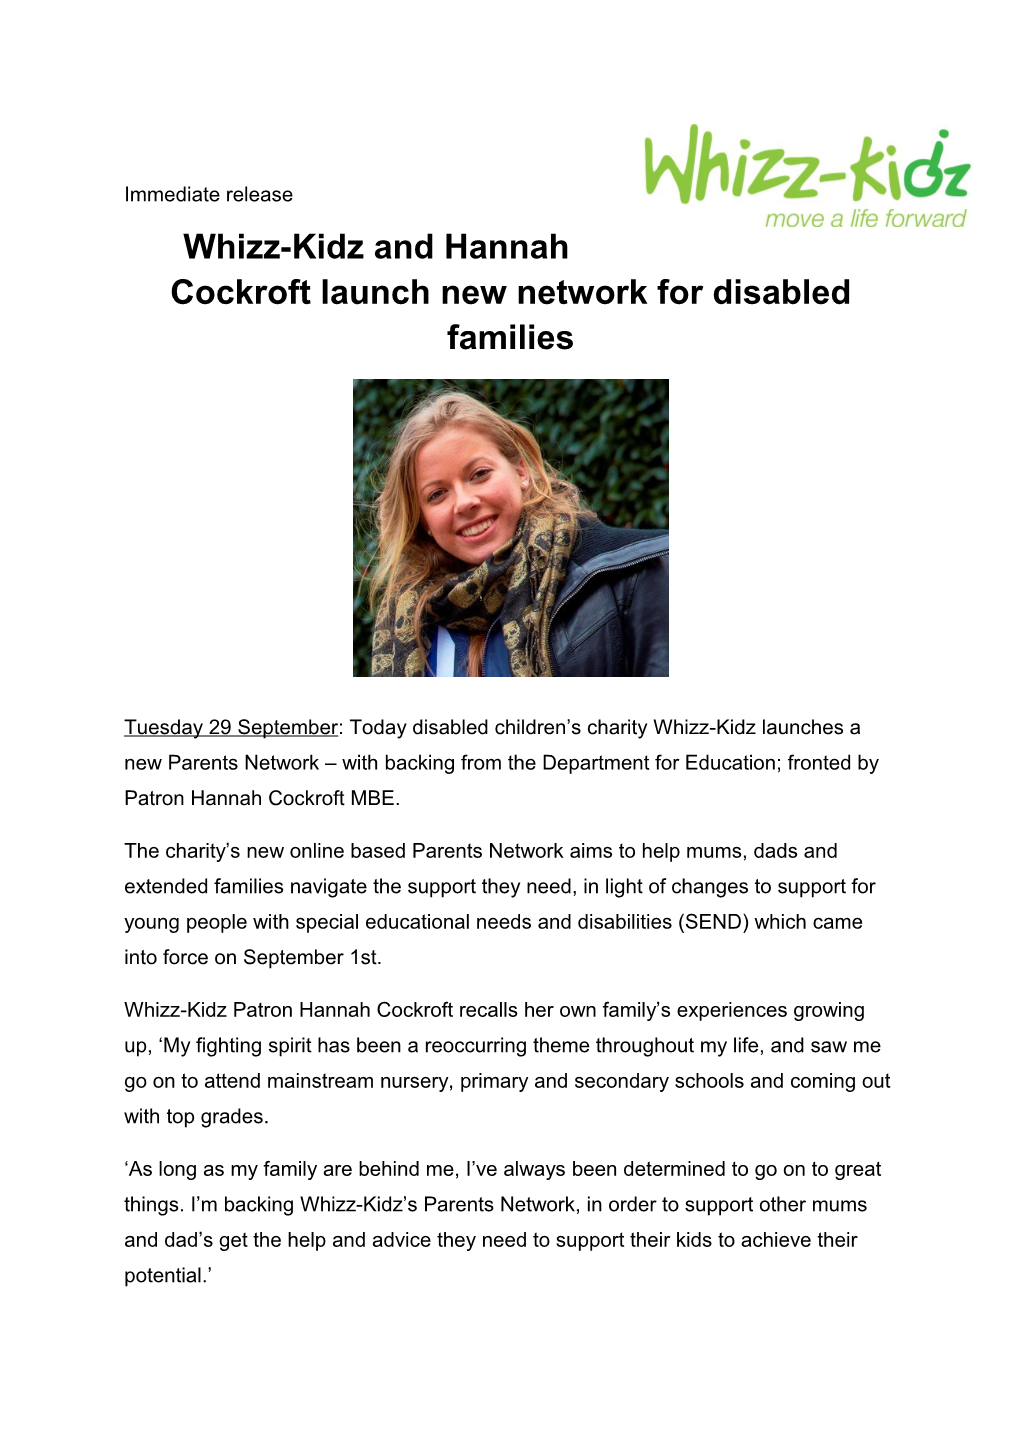 Whizz-Kidz and Hannah Cockroft Launch New Network for Disabled Families